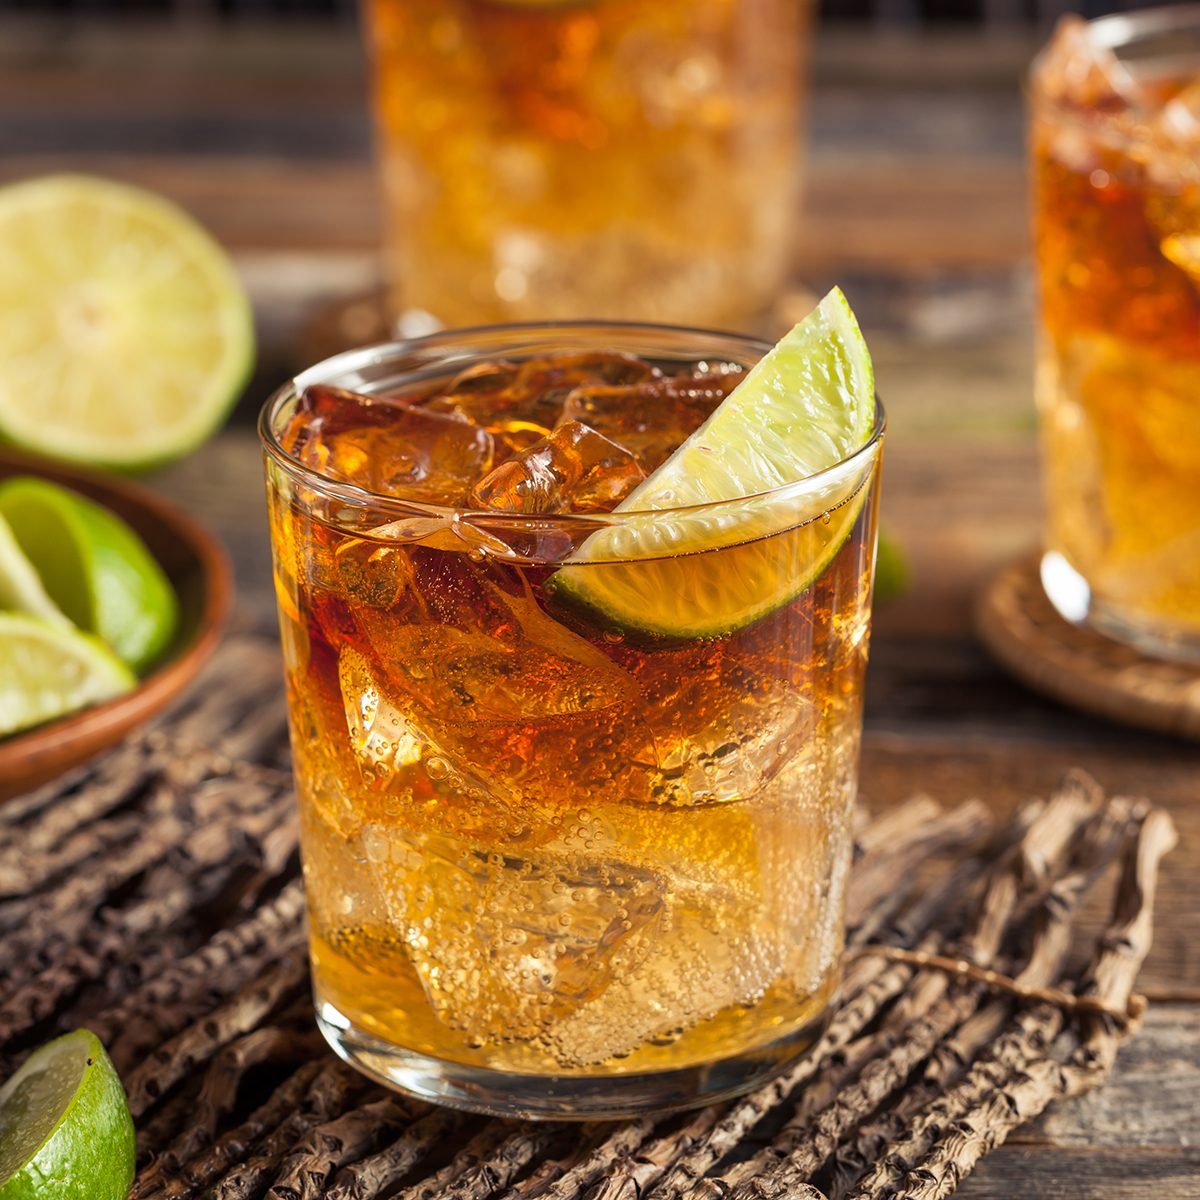 15 Classic Rum Drinks That You Should Know Taste Of Home